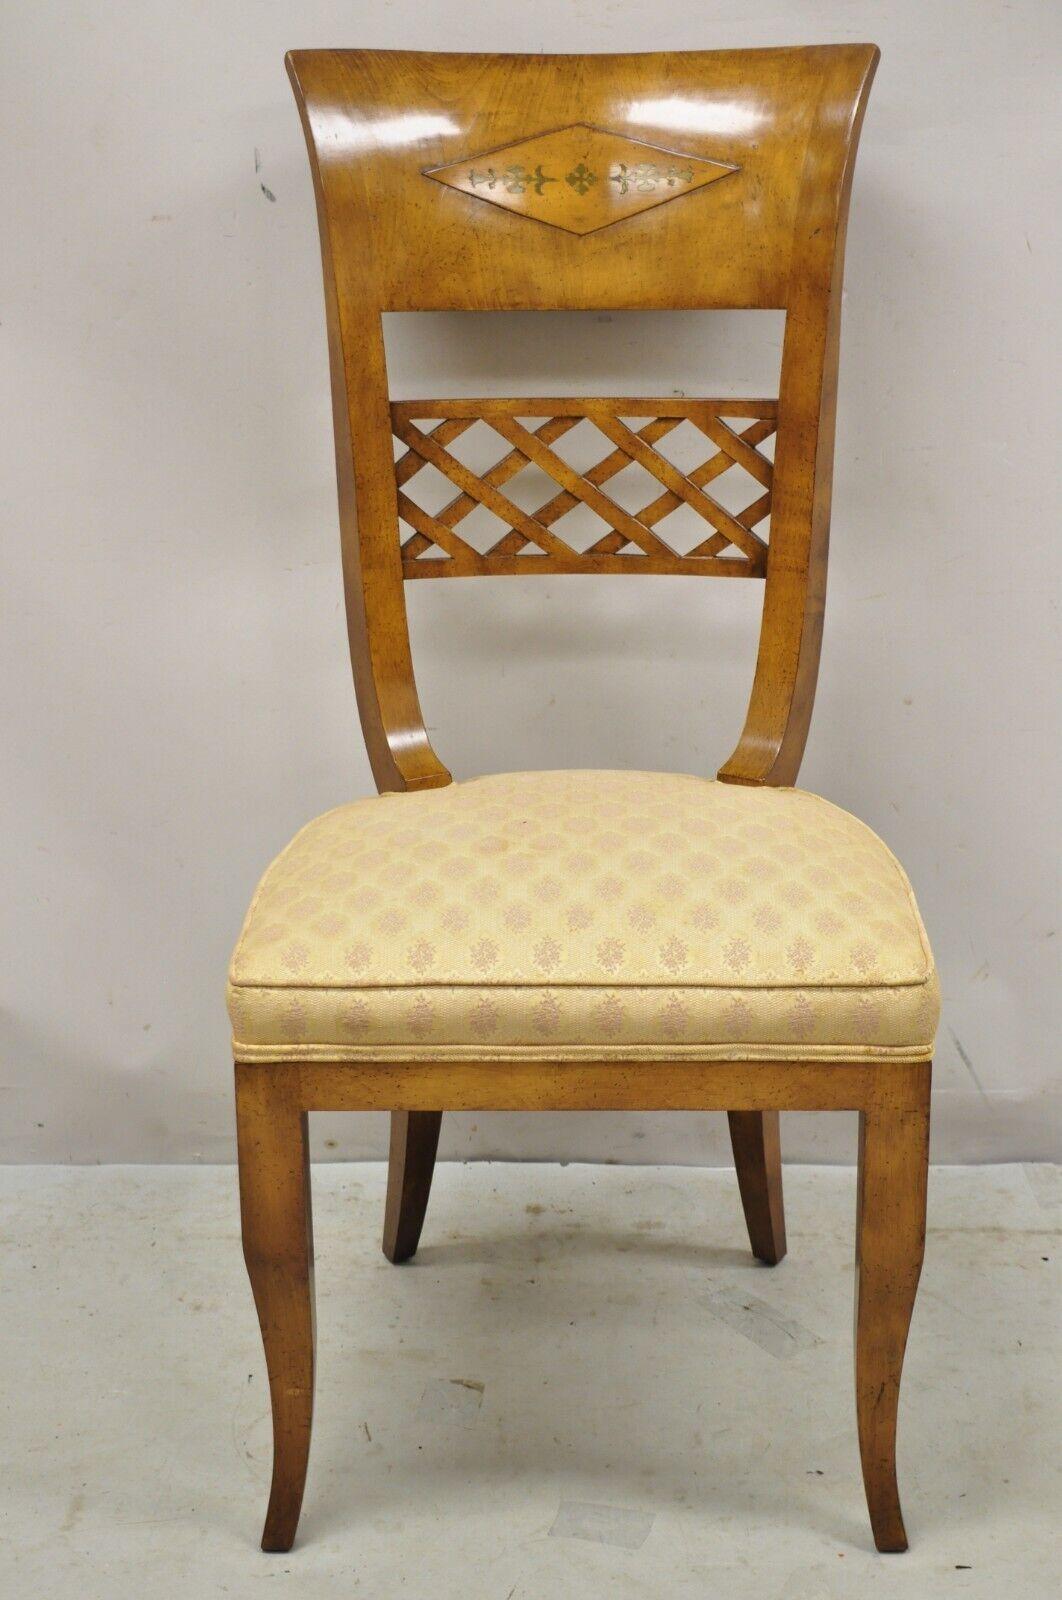 20th Century Italian Regency Style Burlwood Brass Inlay Tall Back Dining Chairs - Set of 4 For Sale